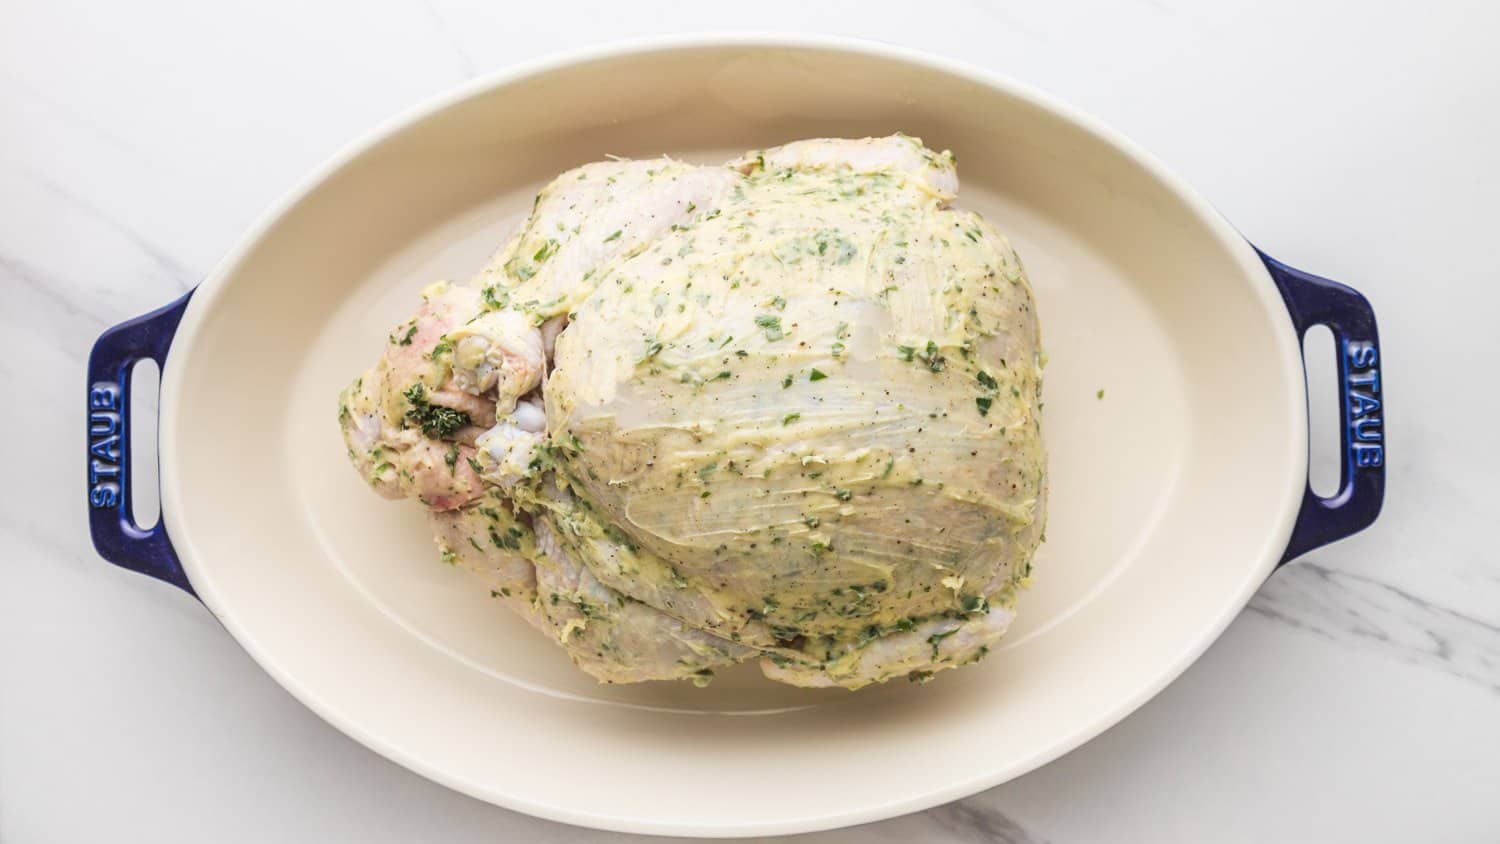 Raw whole chicken slathered with herb butter and placed in an oval roasting ceramic dish by Staub